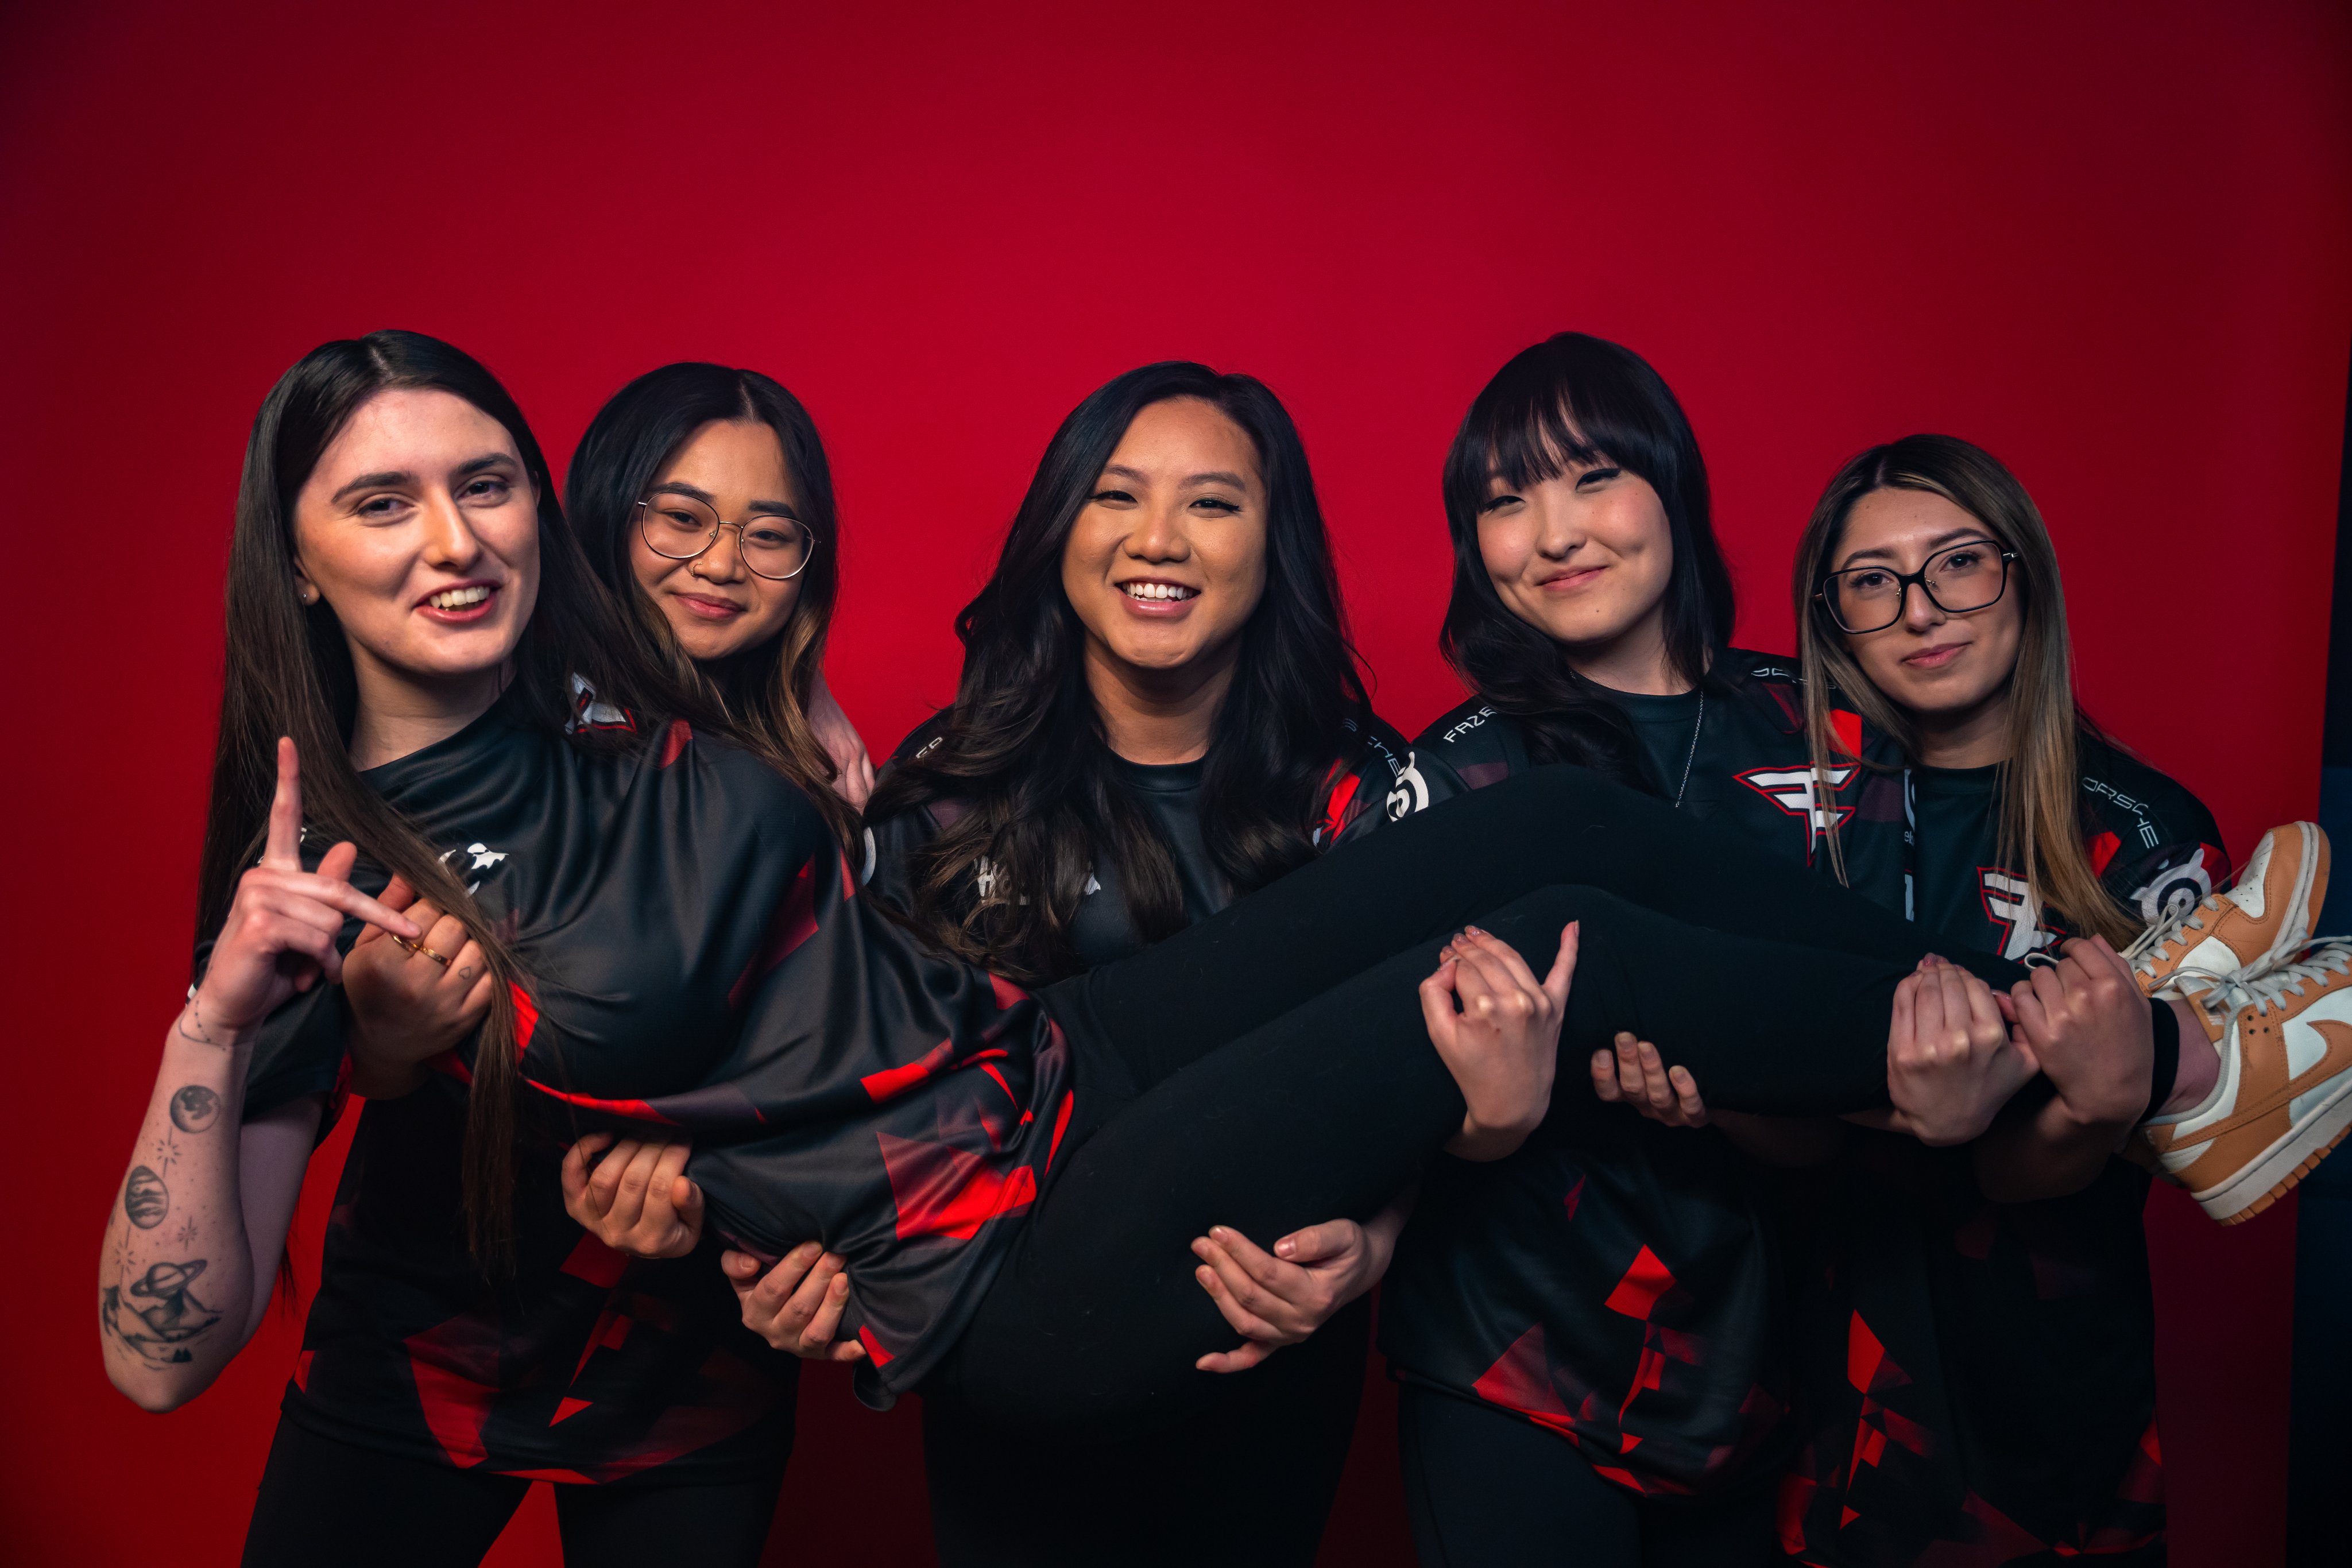 A team photo of all five members of FaZe Clan's first all woman esports team. Four of the members are holding up the fifth member and everyone is smiling.